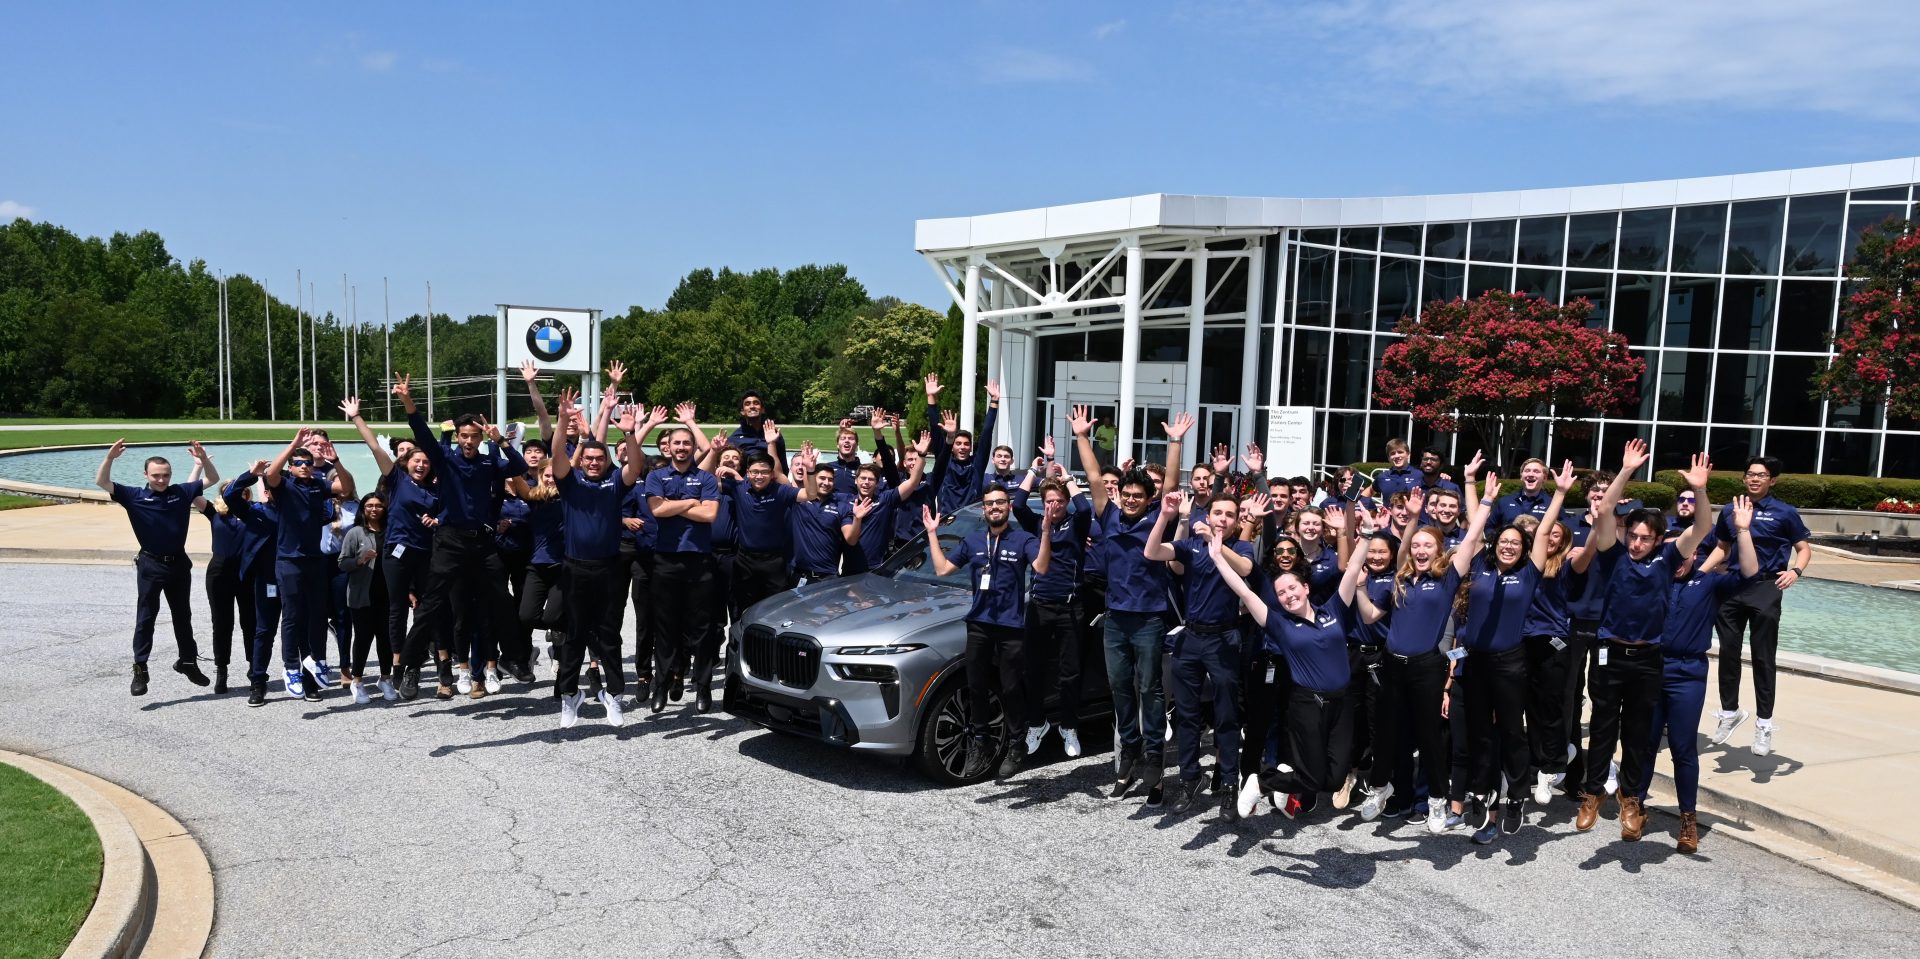 The image shows a group of interns at the BMW plant in Spartanburg.